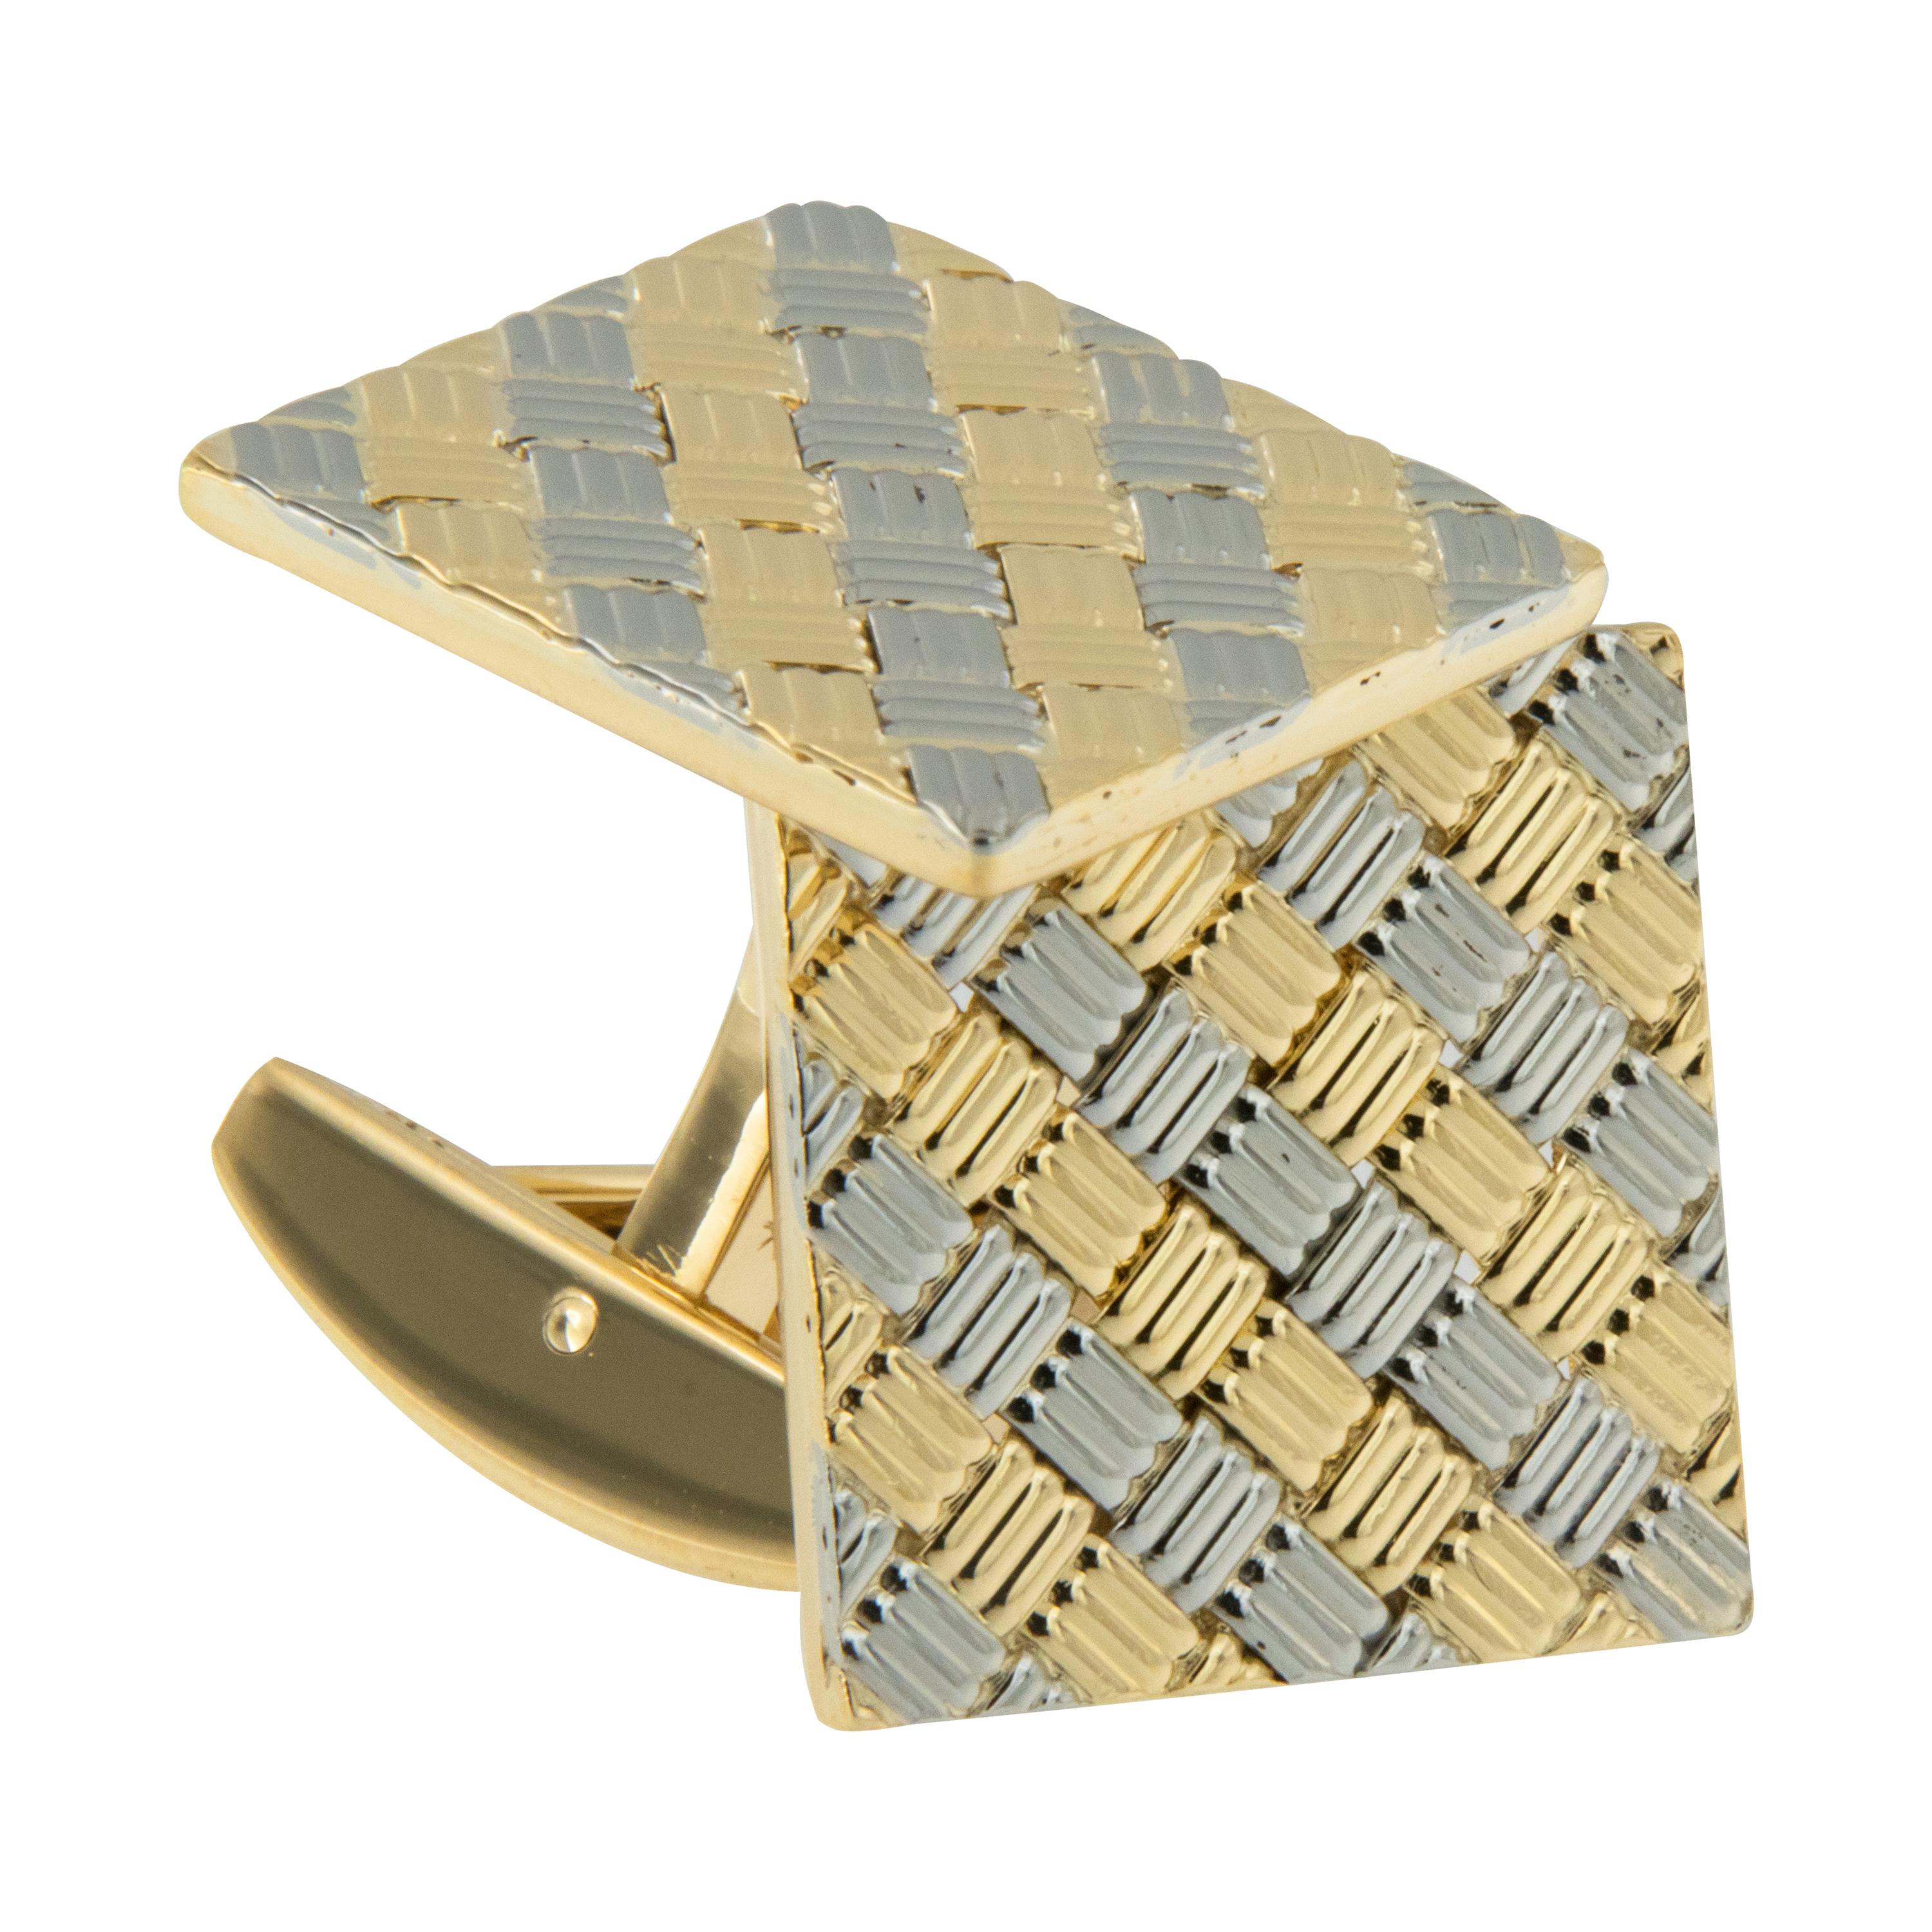 For the consummate, stylish man we offer these handsome & classic cufflinks ! Handmade by Schubot Jewelers, these new, old stock pieces with alternating 18 karat  yellow & white gold in stylized woven fashion will set off any shirt. Sturdy, curved